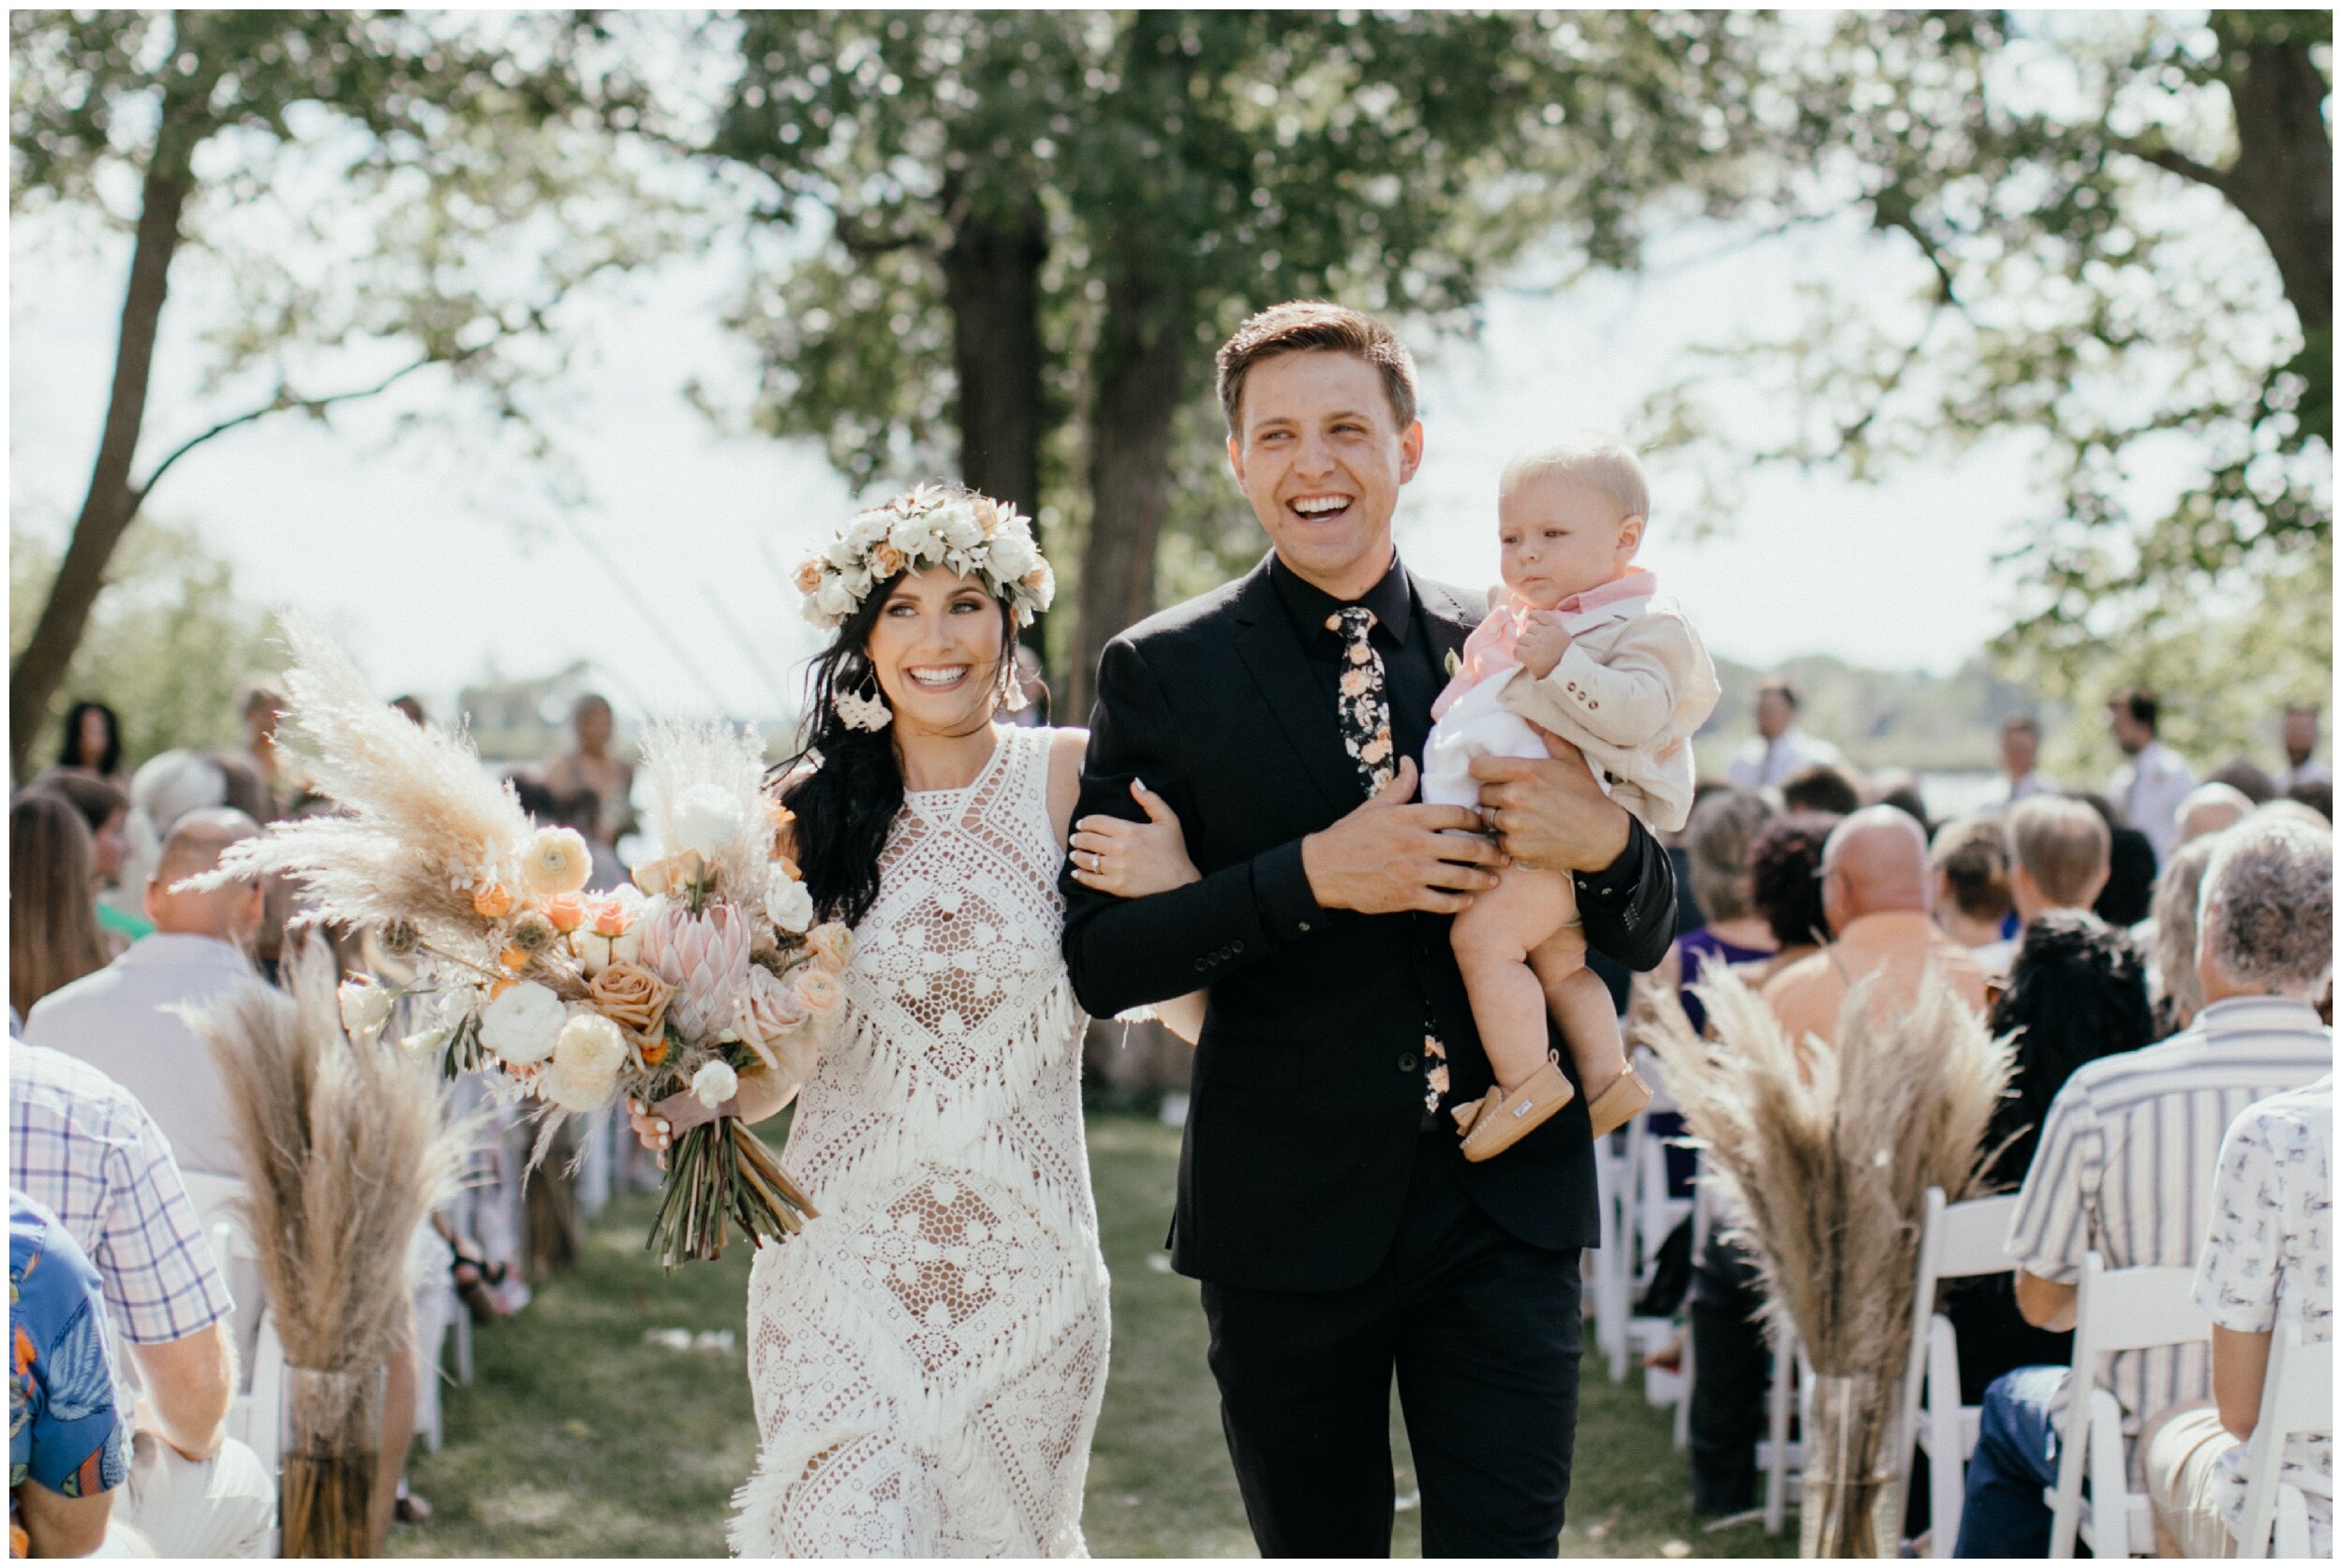 Bride and groom walking down aisle with their baby at Minnesota backyard wedding